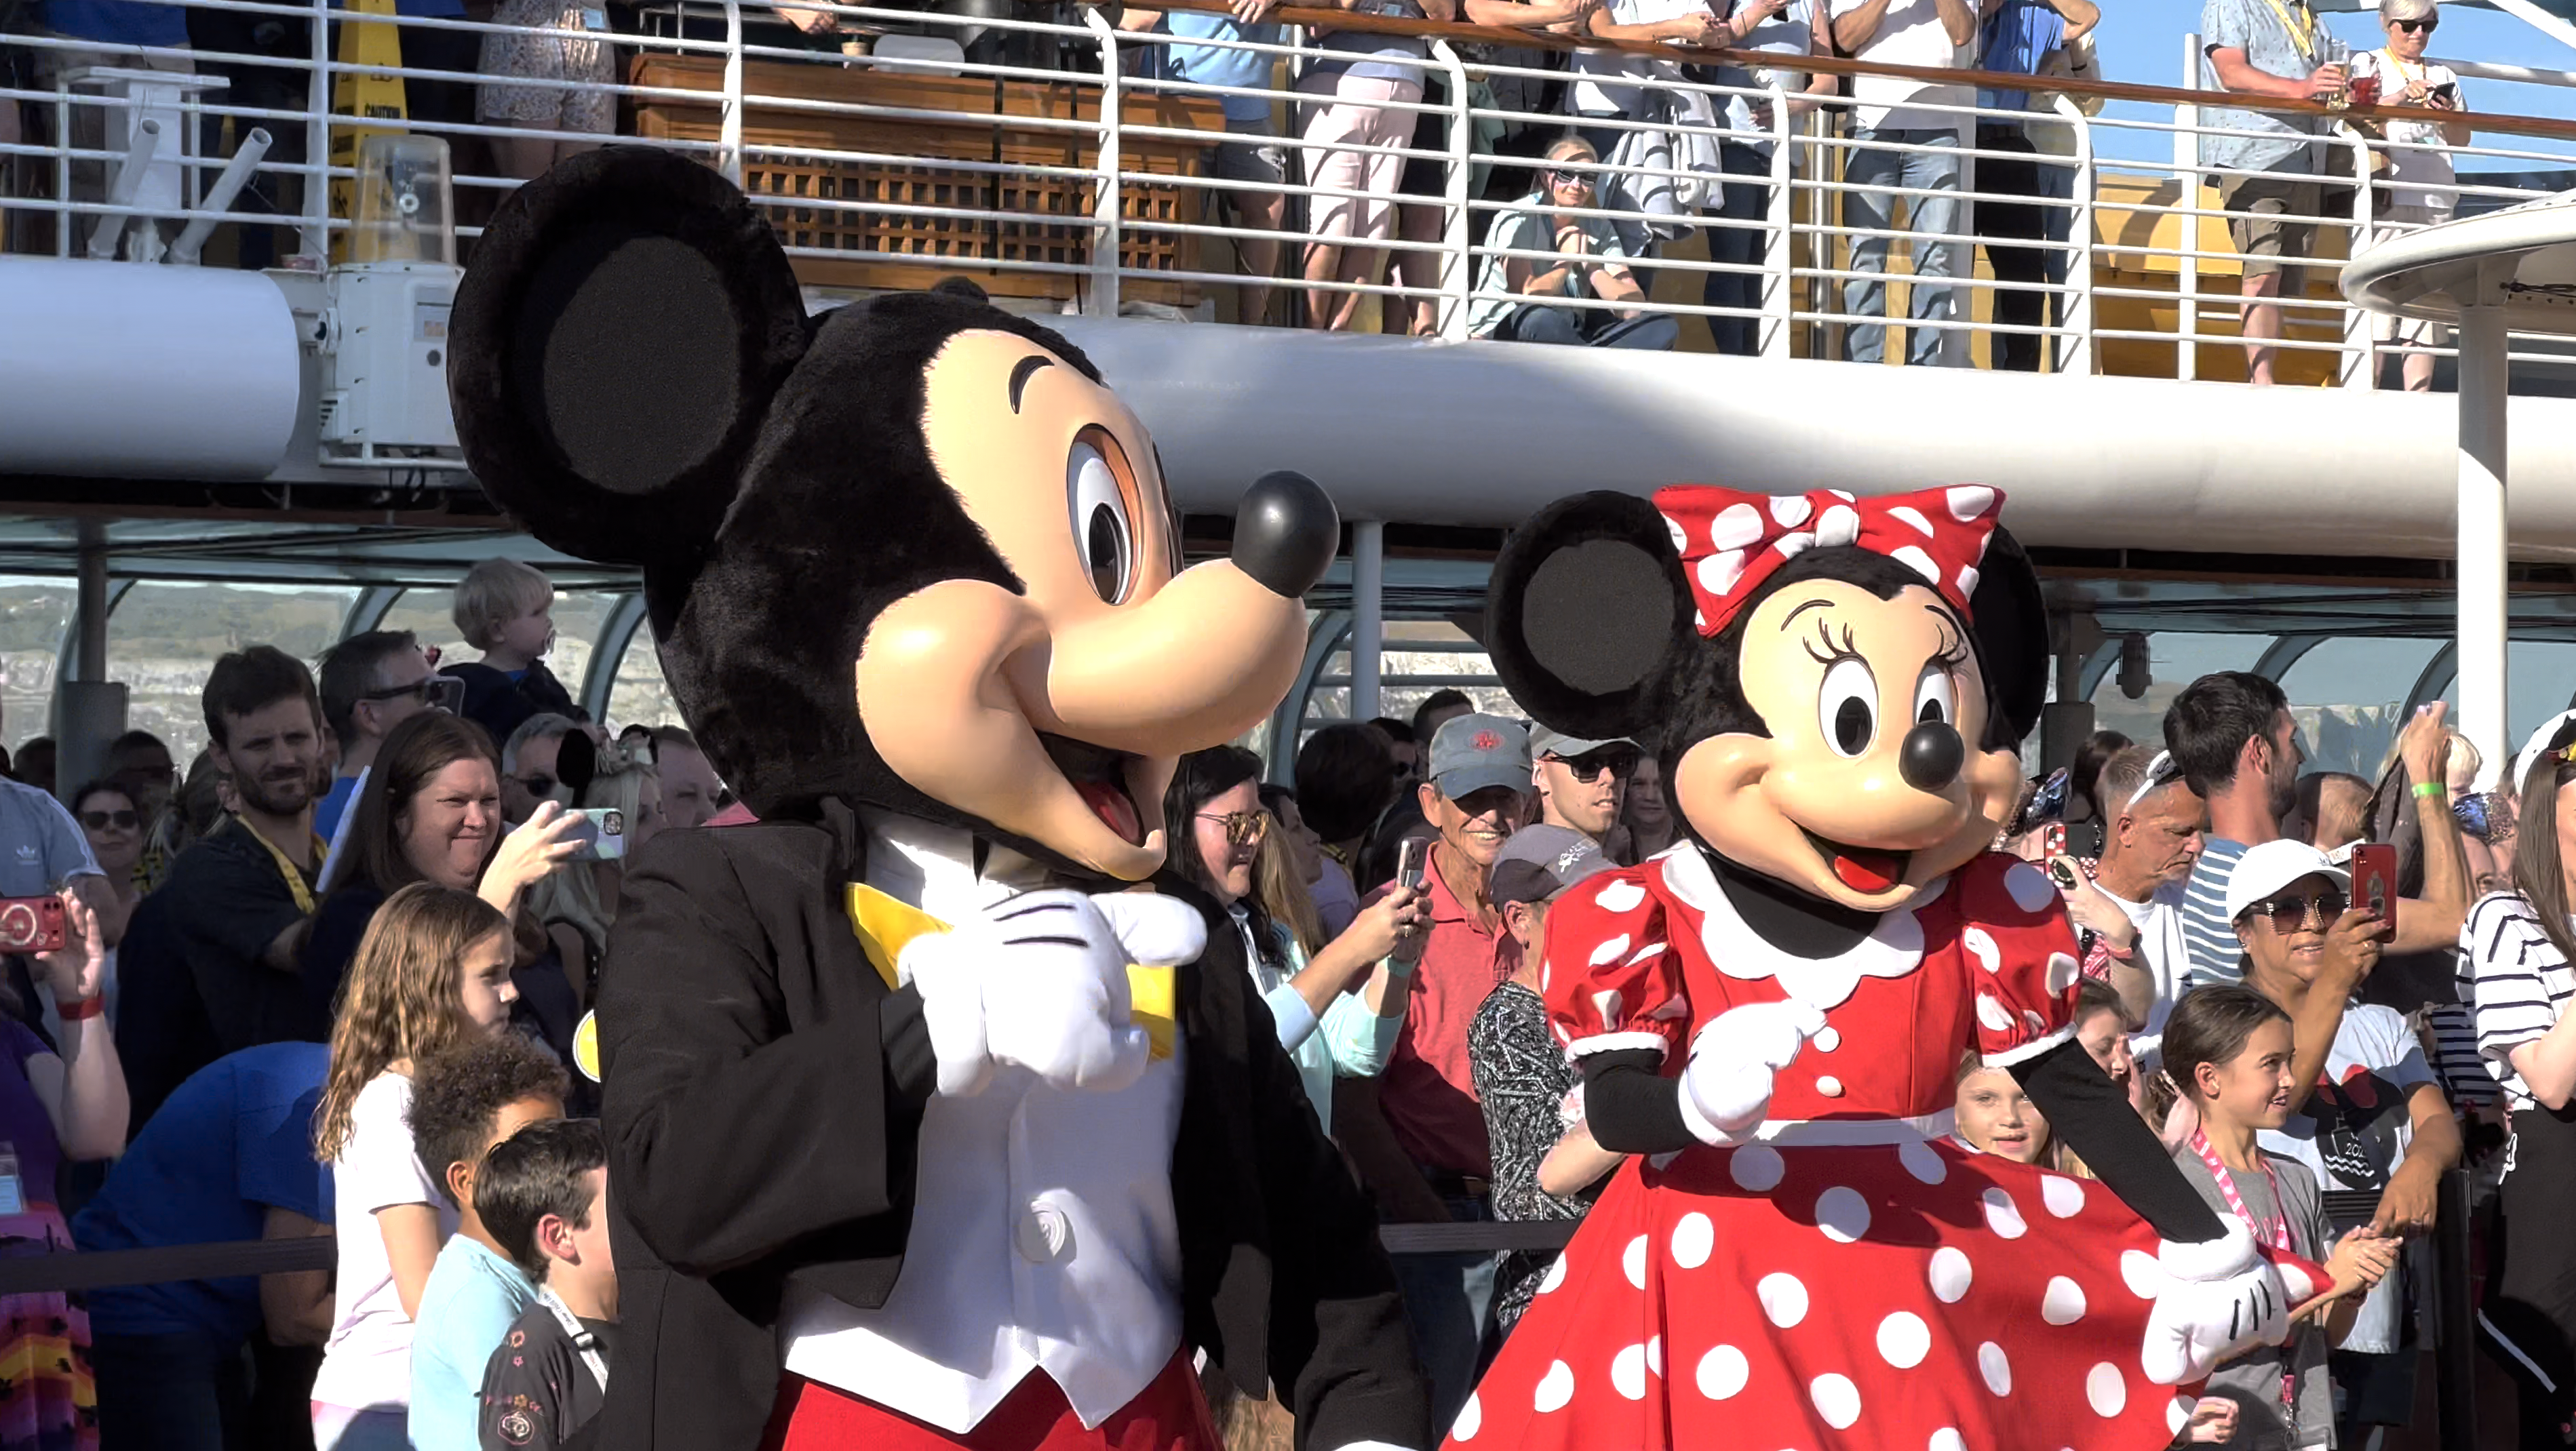 I Cruised Disney As An Adult Without Kids